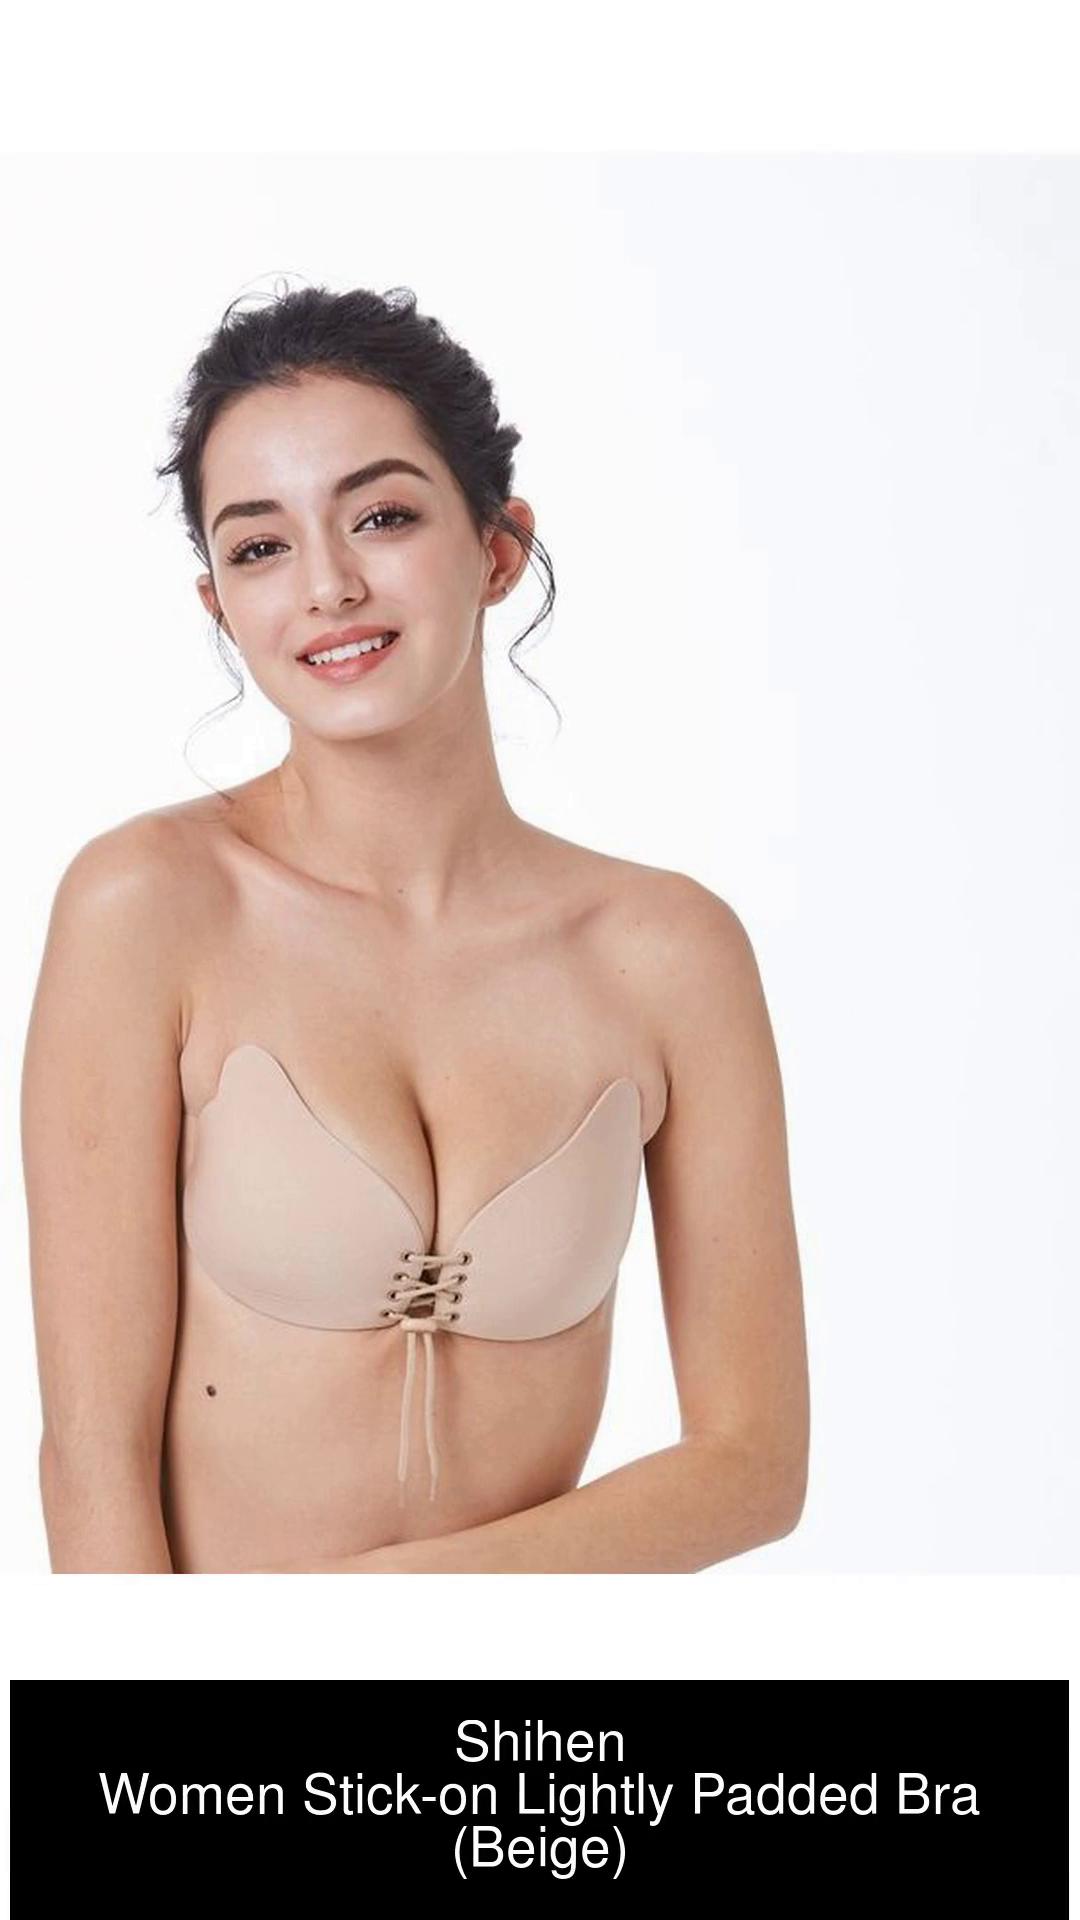 Buy Shihen Women Stick-on Lightly Padded Bra Online at Best Prices in India